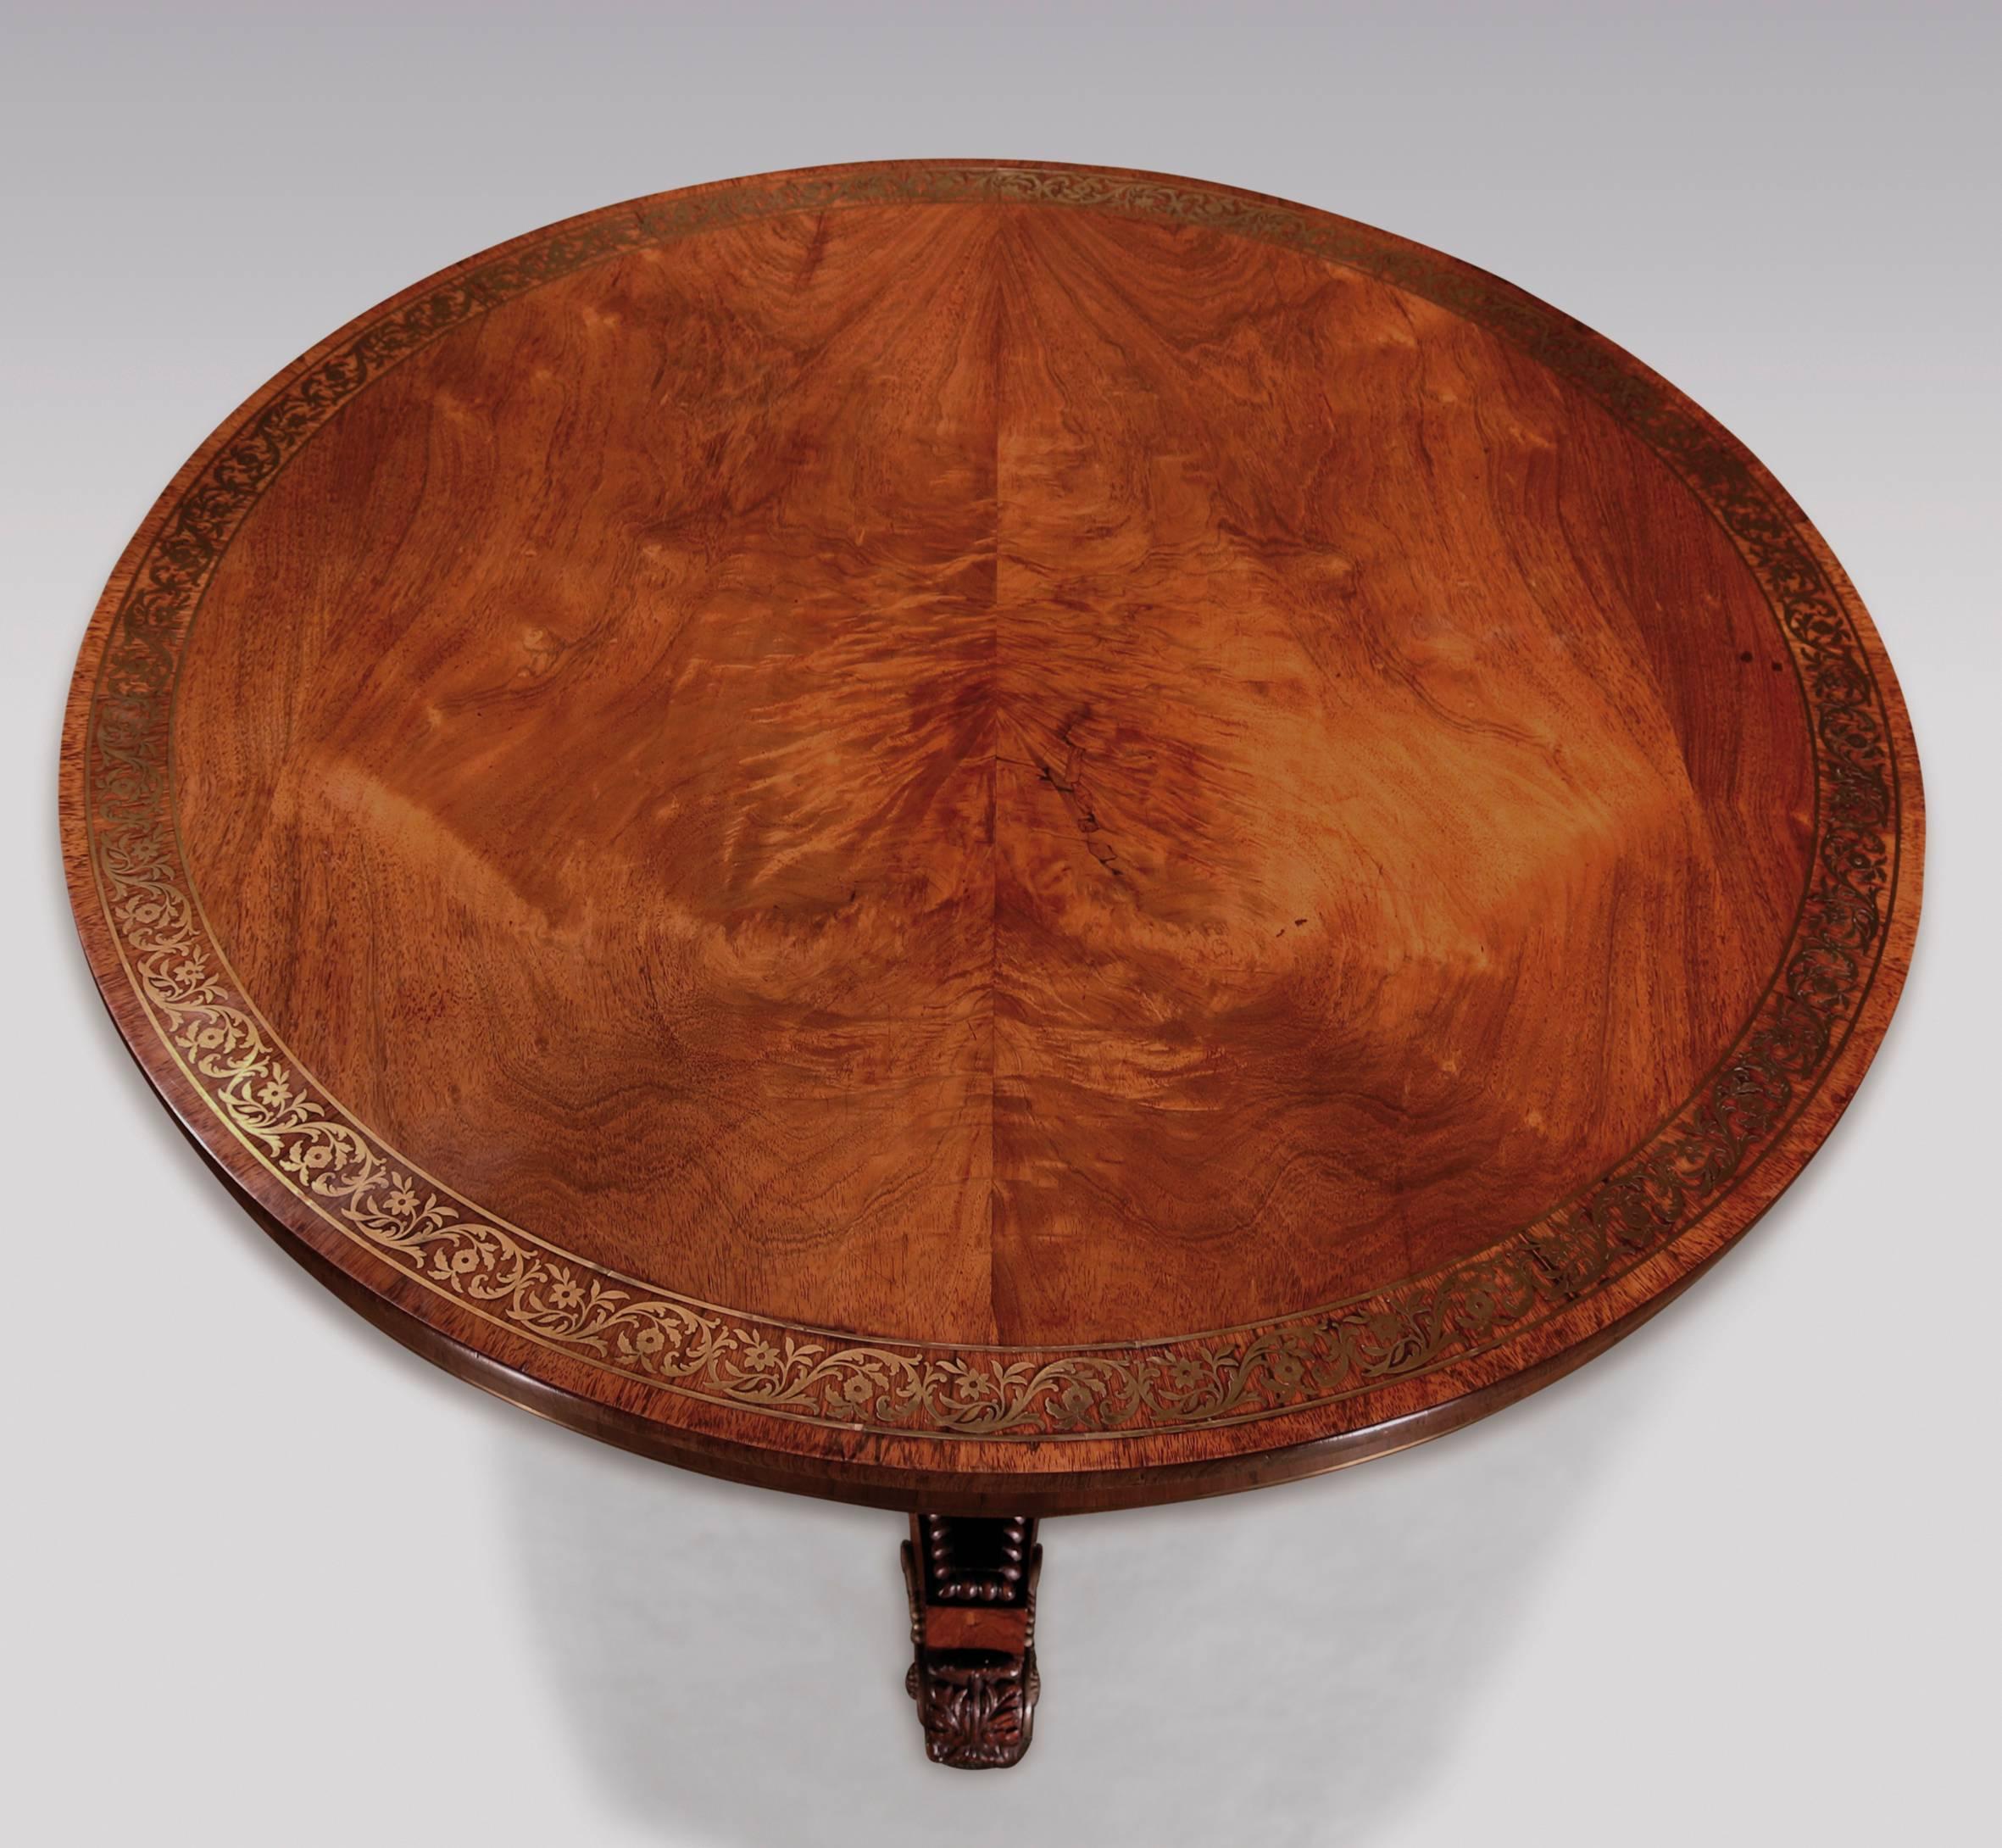 A fine quality early 19th century Regency period mahogany breakfast table, having brass inlaid flame figured circular top, raised on triangular stem with brass urn inlay, supported on leaf carved and beaded concave platform base, ending on acanthus